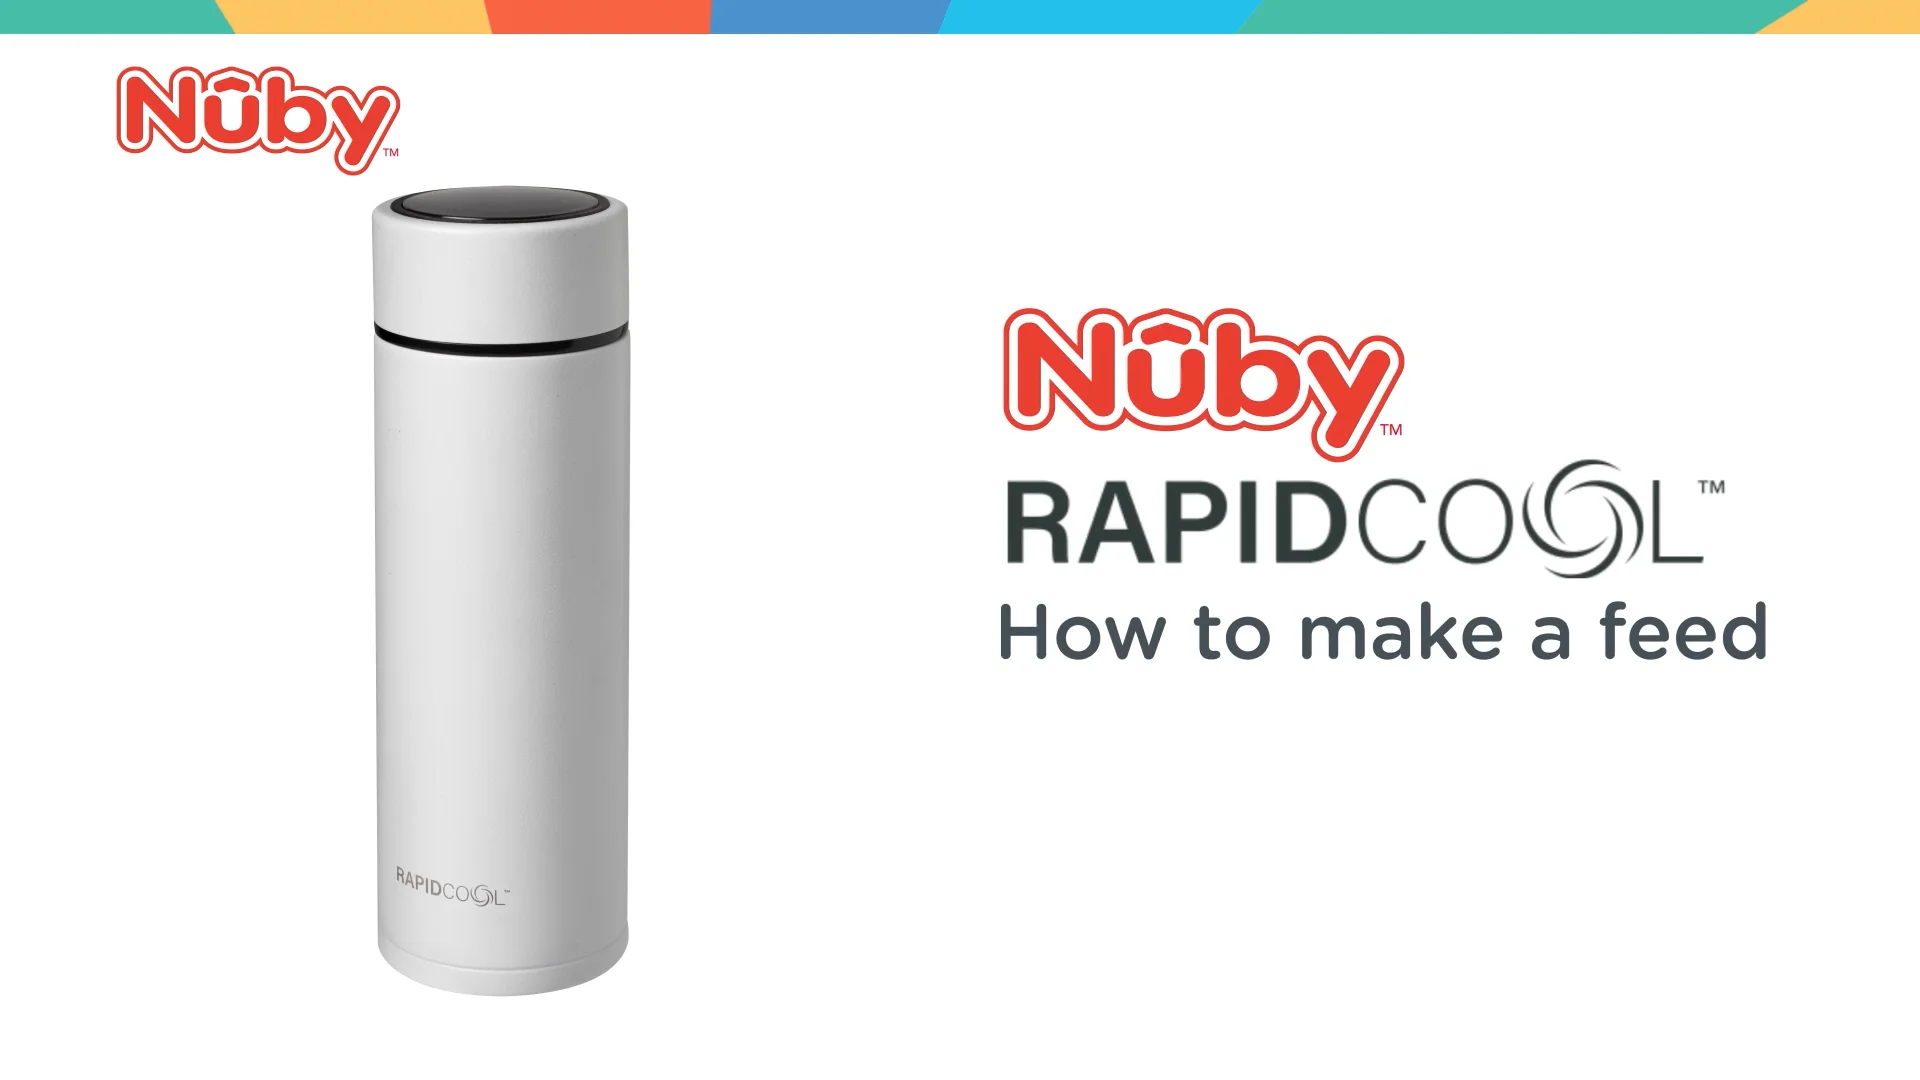 How to make a feed with the Nuby Rapidcool Kit 